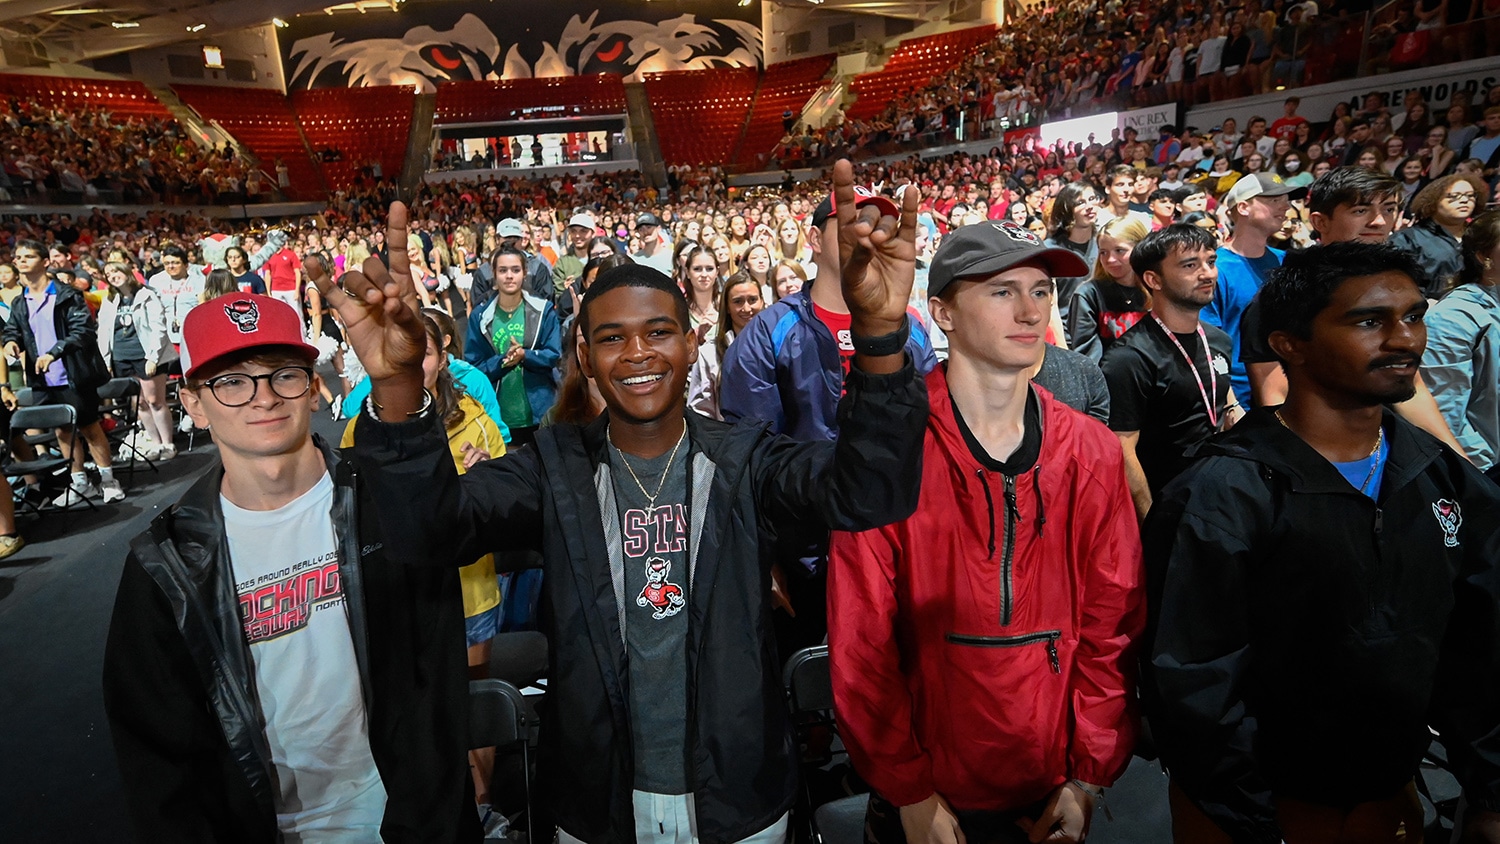 A student holds up his hands in the "wolfie" gesture while surrounded by other students in Reynolds Coliseum.